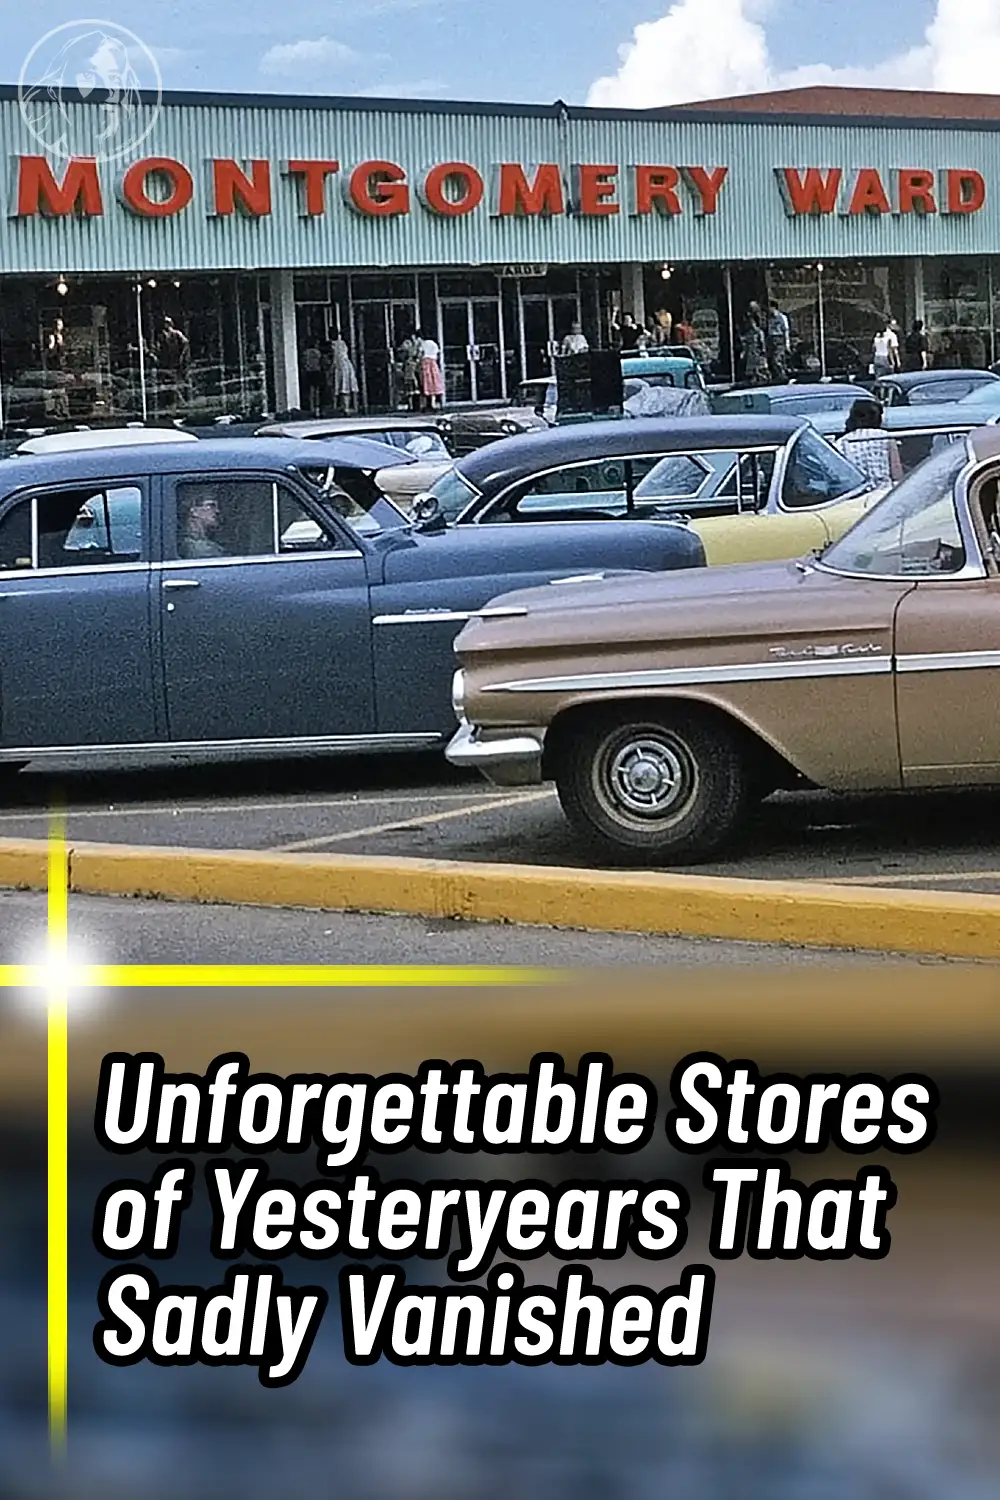 Unforgettable Stores of Yesteryears That Sadly Vanished